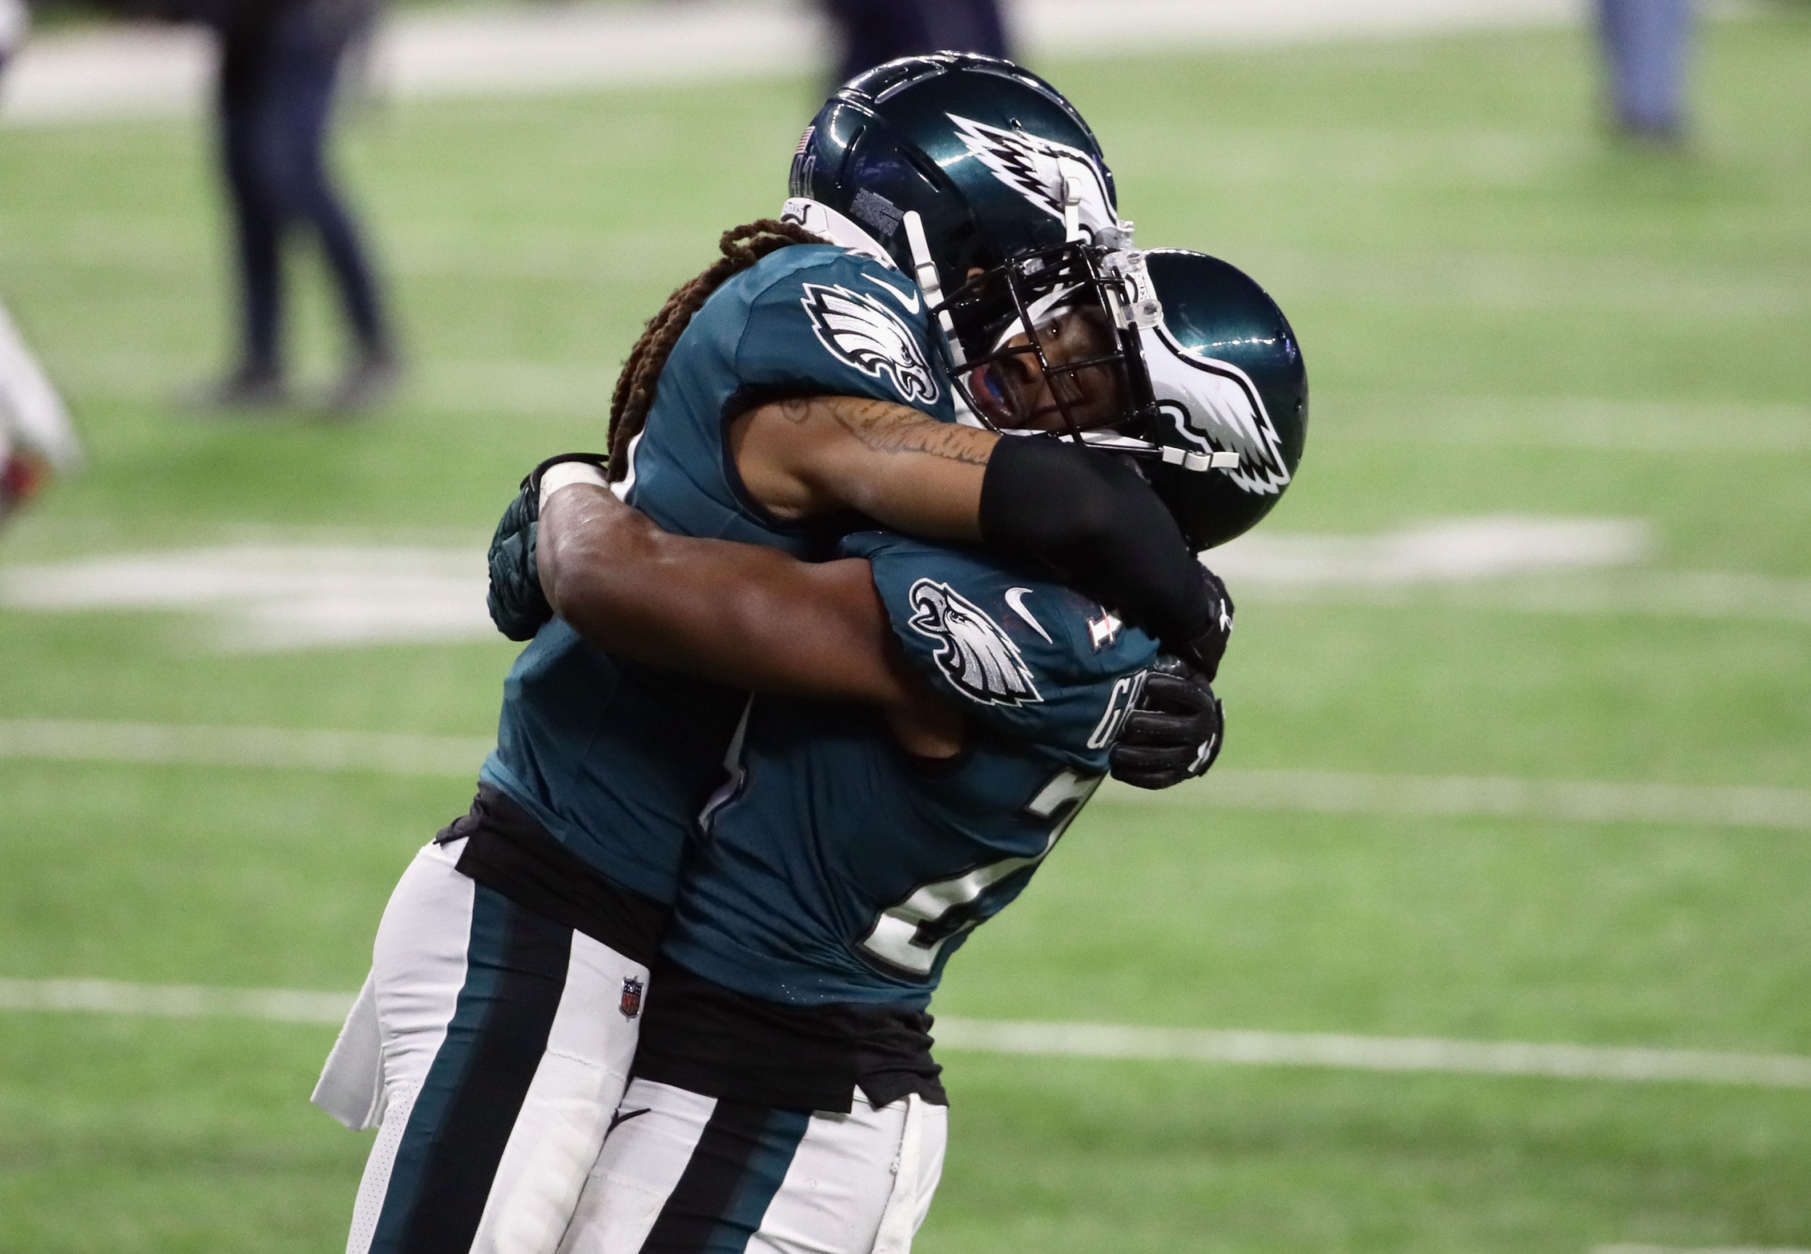 MINNEAPOLIS, MN - FEBRUARY 04:  Ronald Darby #41 and  Corey Graham #24 of the Philadelphia Eagles celebrate winning Super Bowl LII against the New England Patriots 41-33 at U.S. Bank Stadium on February 4, 2018 in Minneapolis, Minnesota.  (Photo by Jonathan Daniel/Getty Images)